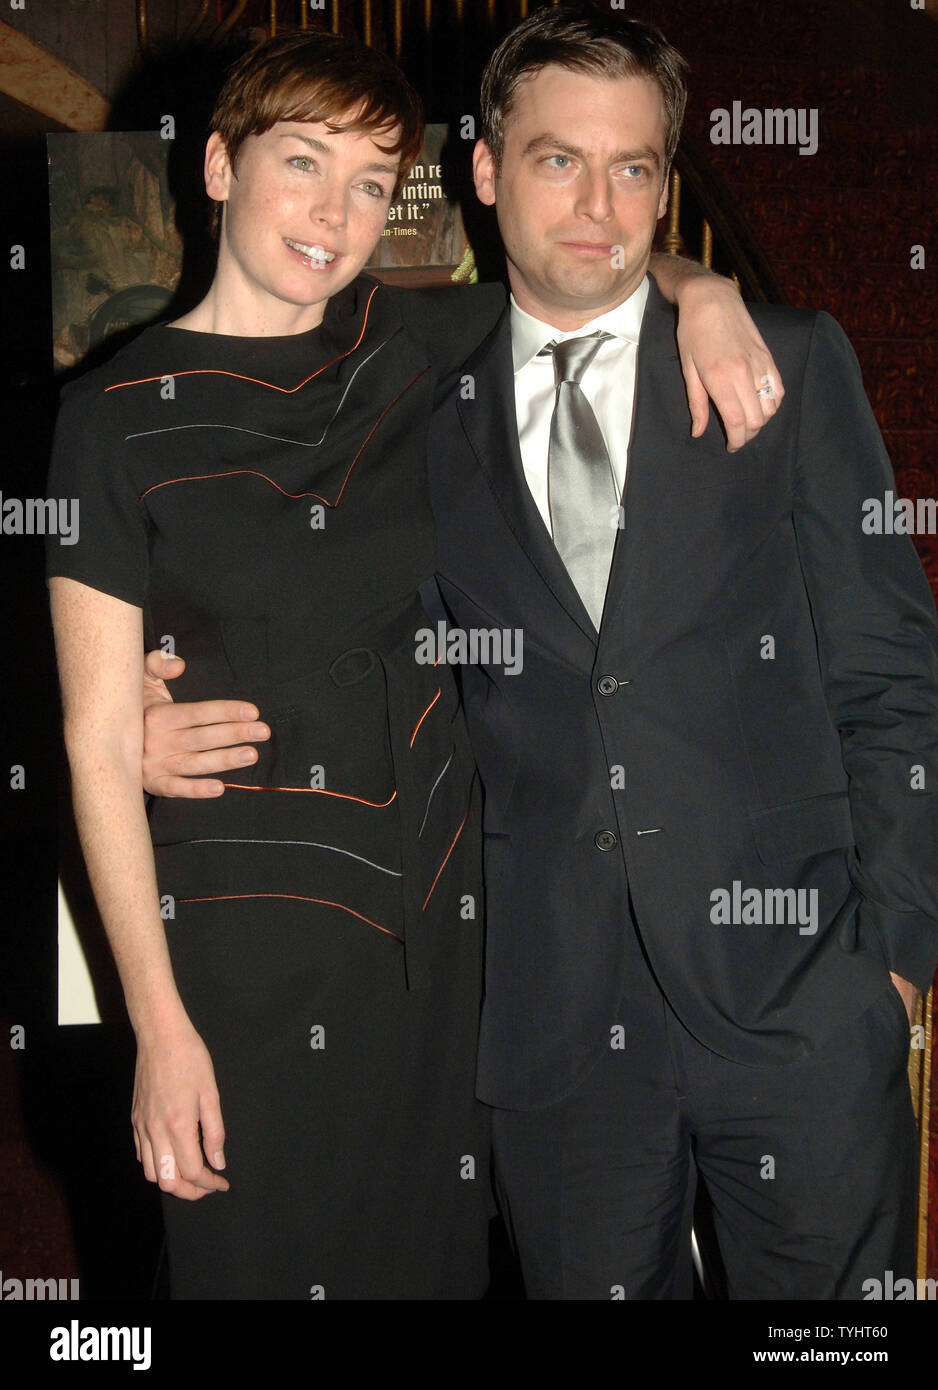 Actress Julianne Nicholson, who stars in the  tv series Law and Order: Criminal Intent and actor Justin Kirk pose for the media at the New York  premiere of their film 'Flannel Pajamas' on November 13, 2006.  (UPI Photo/Ezio Petersen) Stock Photo